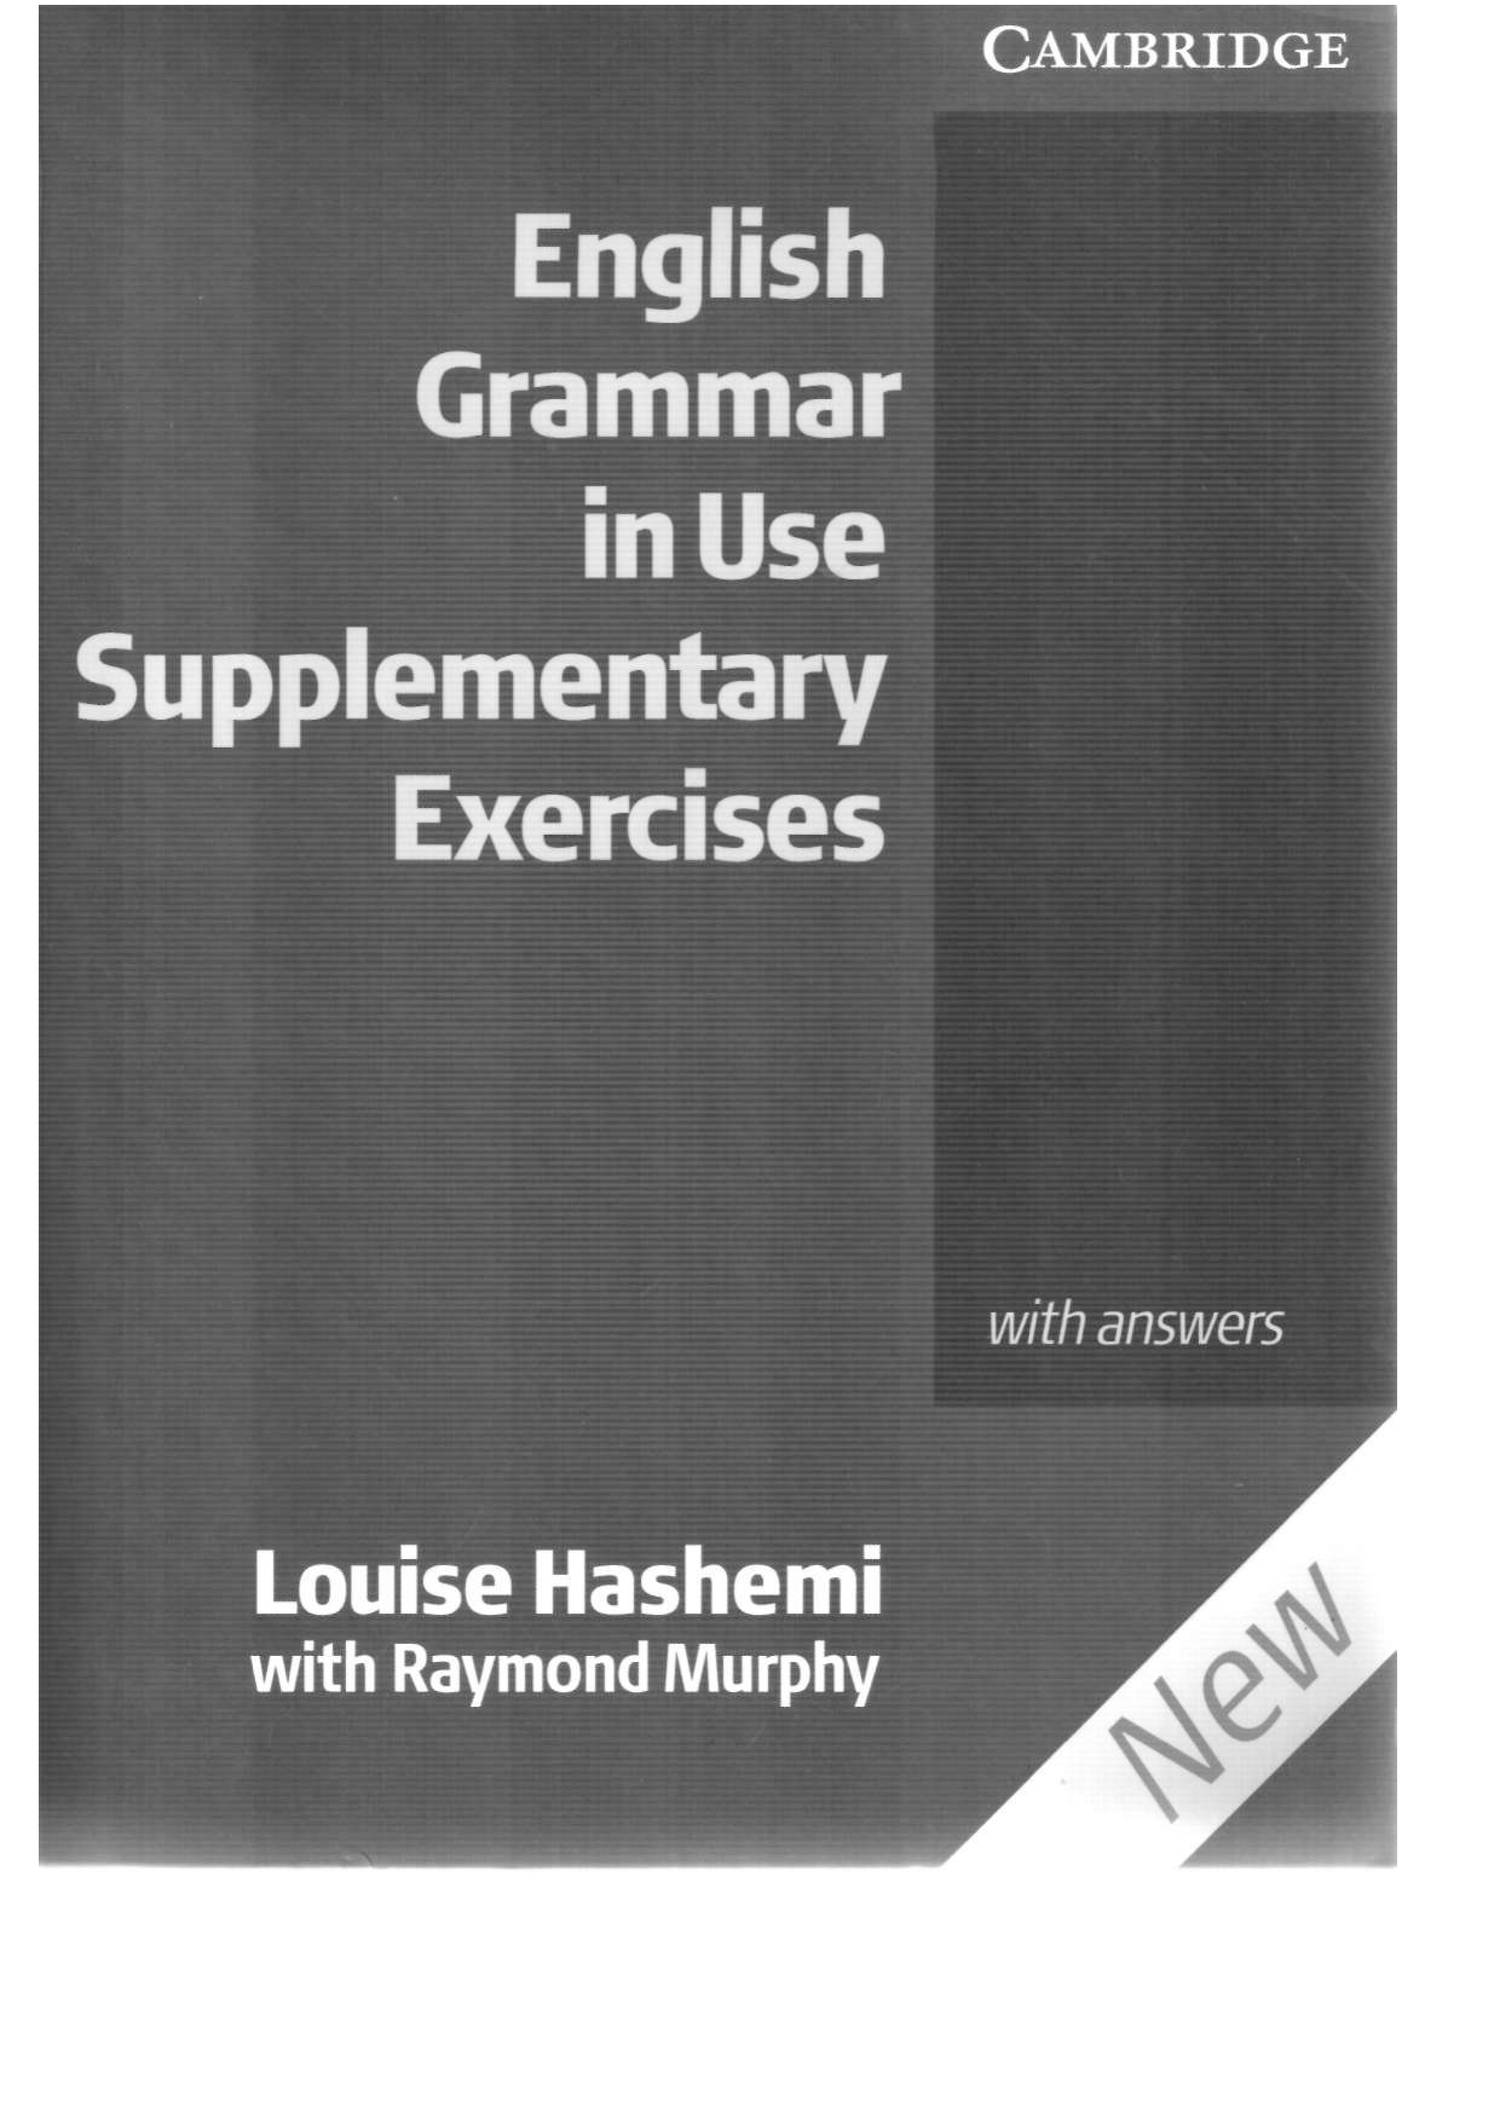 english grammar in use supplementary exercises 4th edition pdf